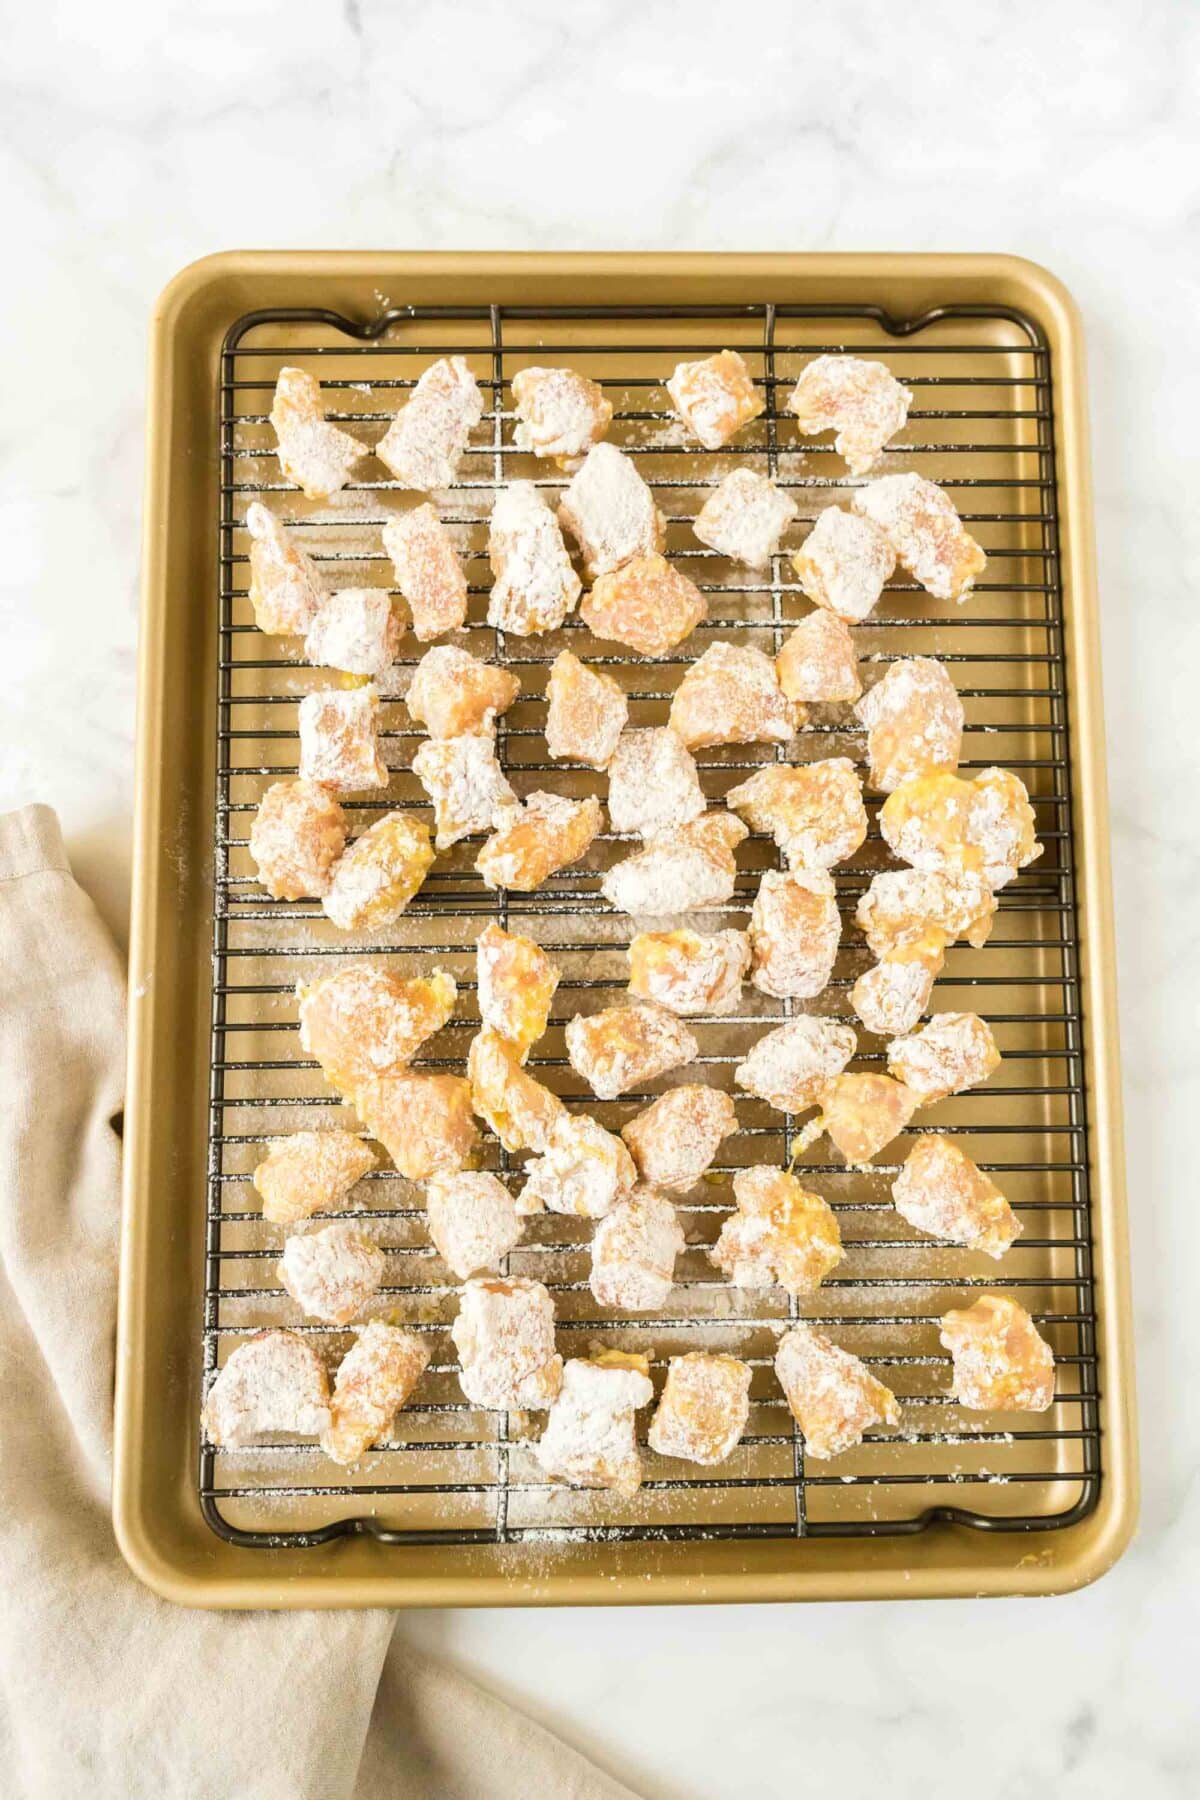 Pieces of breaded chicken on a cooling rack.